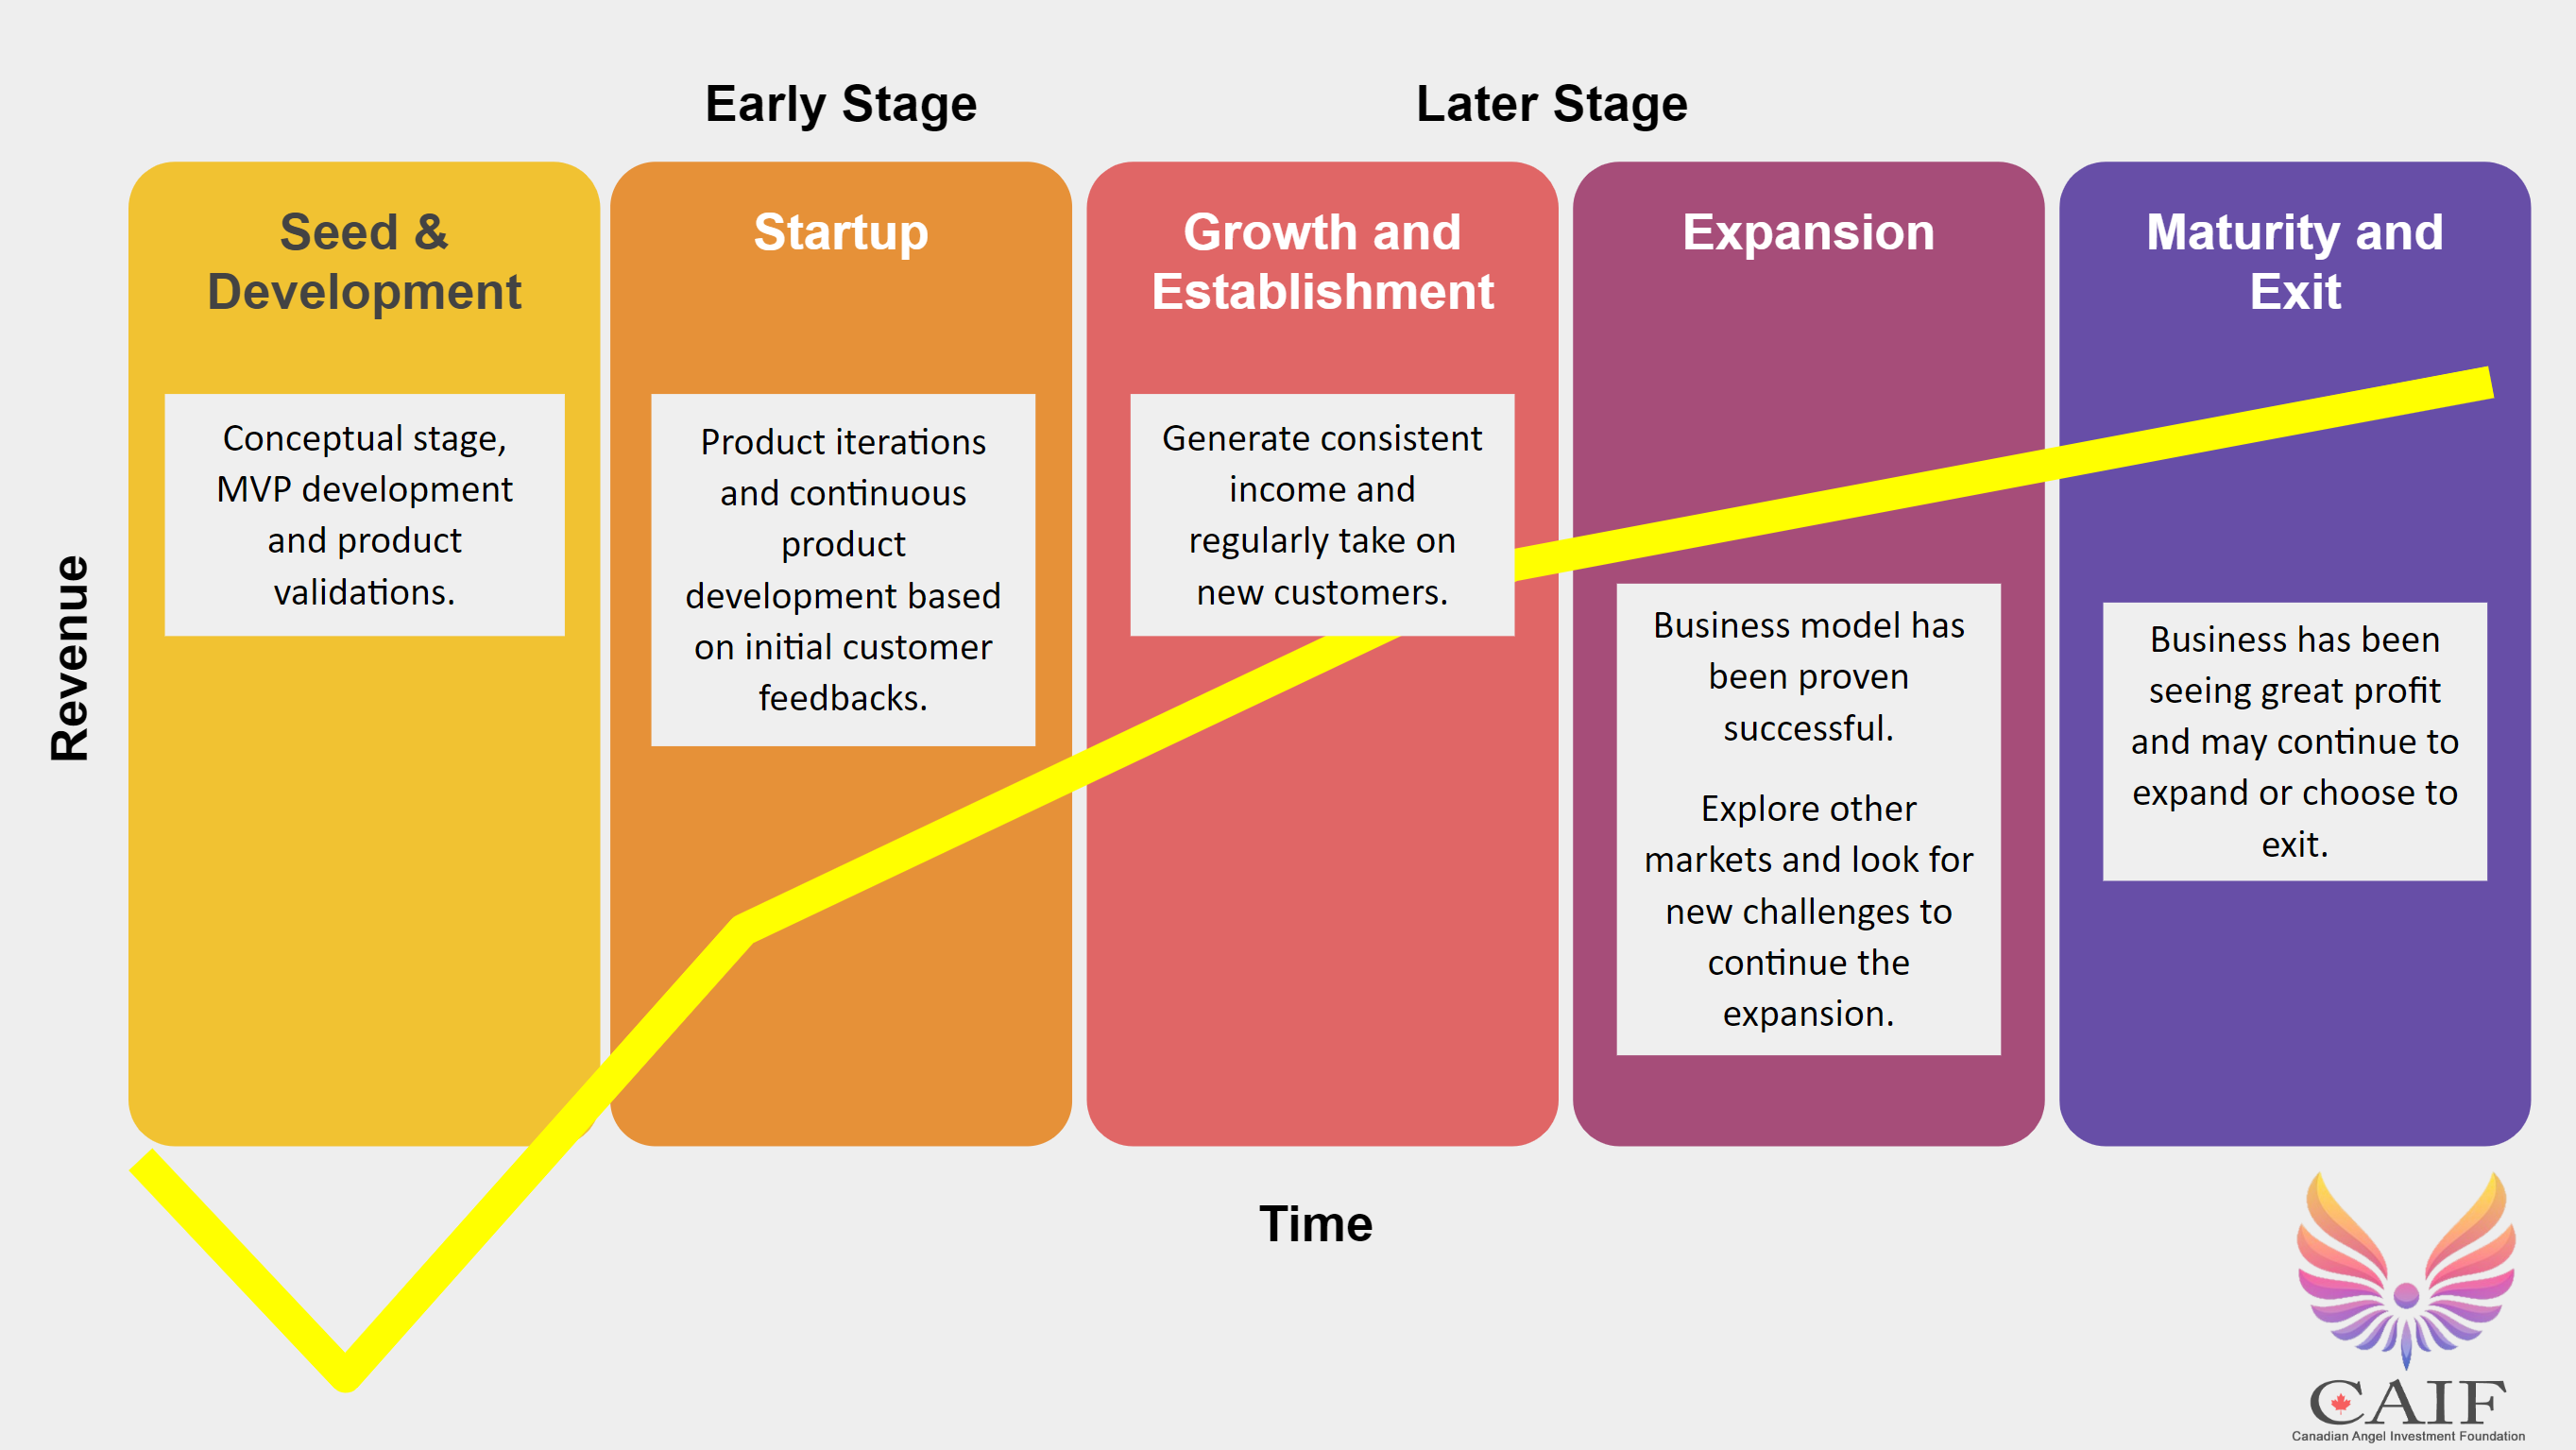 Expansion revenue is essential for the late stage growth of your startup company.